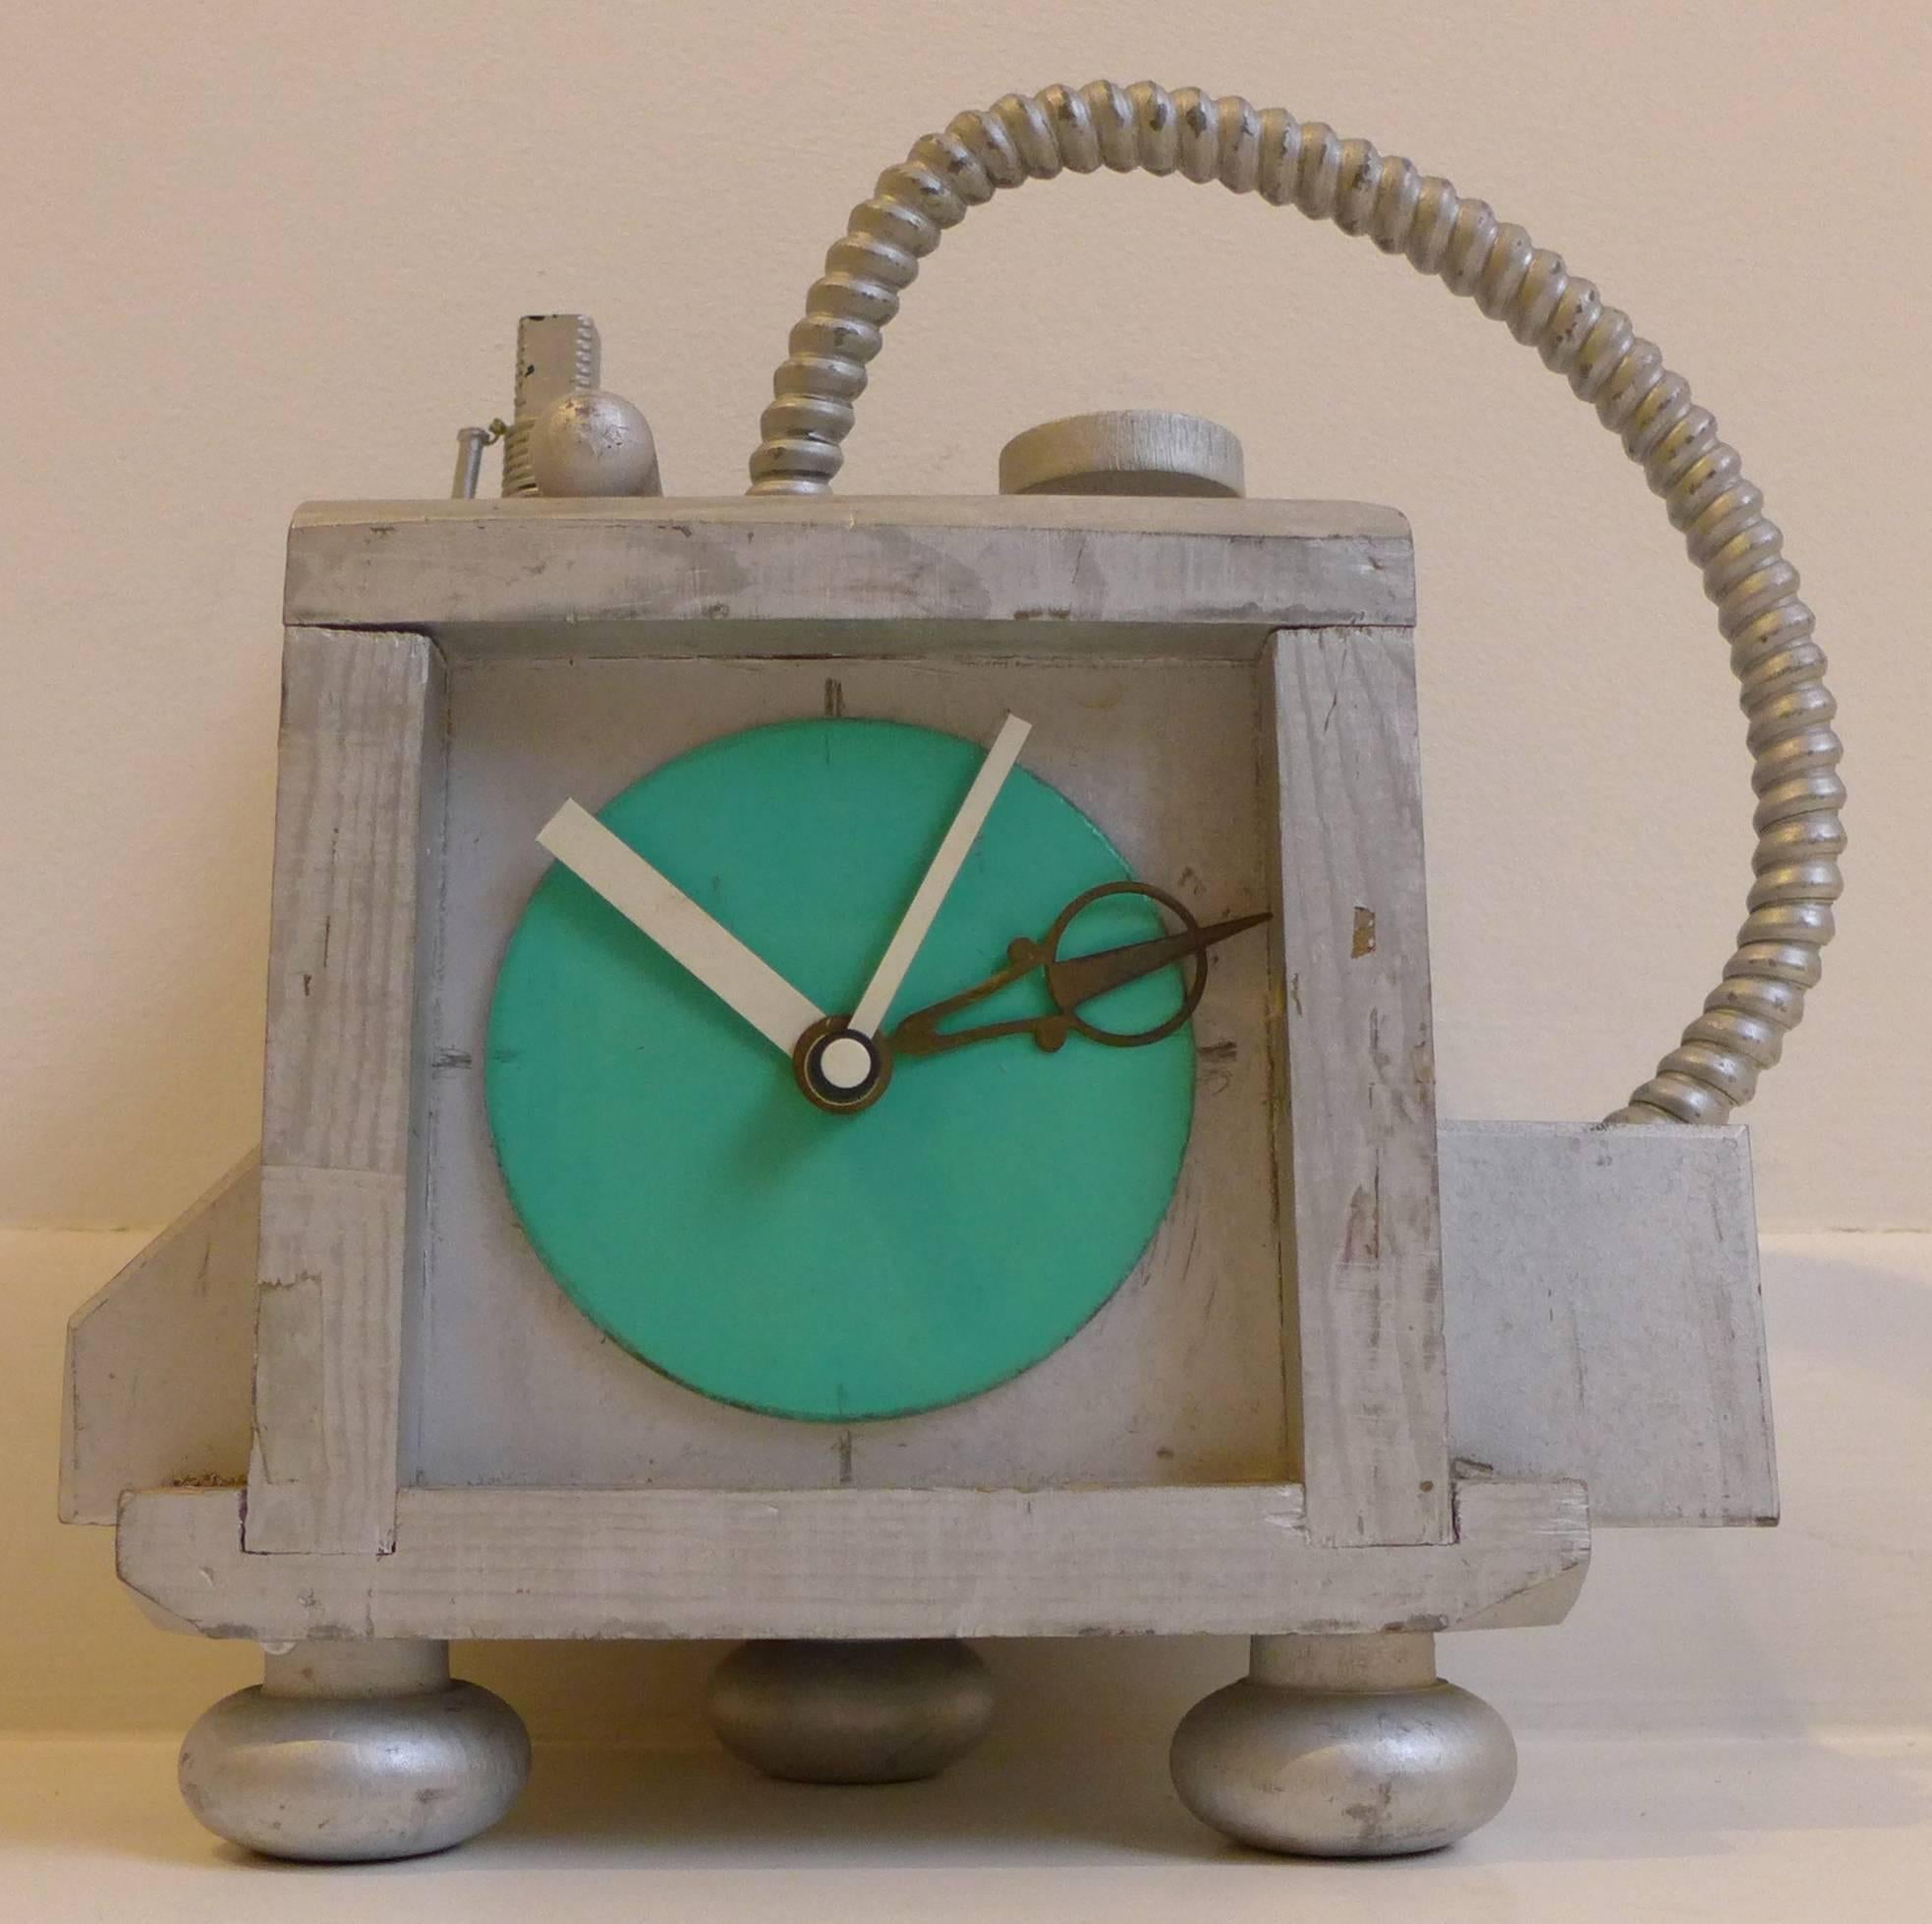 Relatively restrained fantasy clock by New York City artist Richard Birkett. An early example of Birkett's post-modernist, steampunk oeuvre, dated 1985 (he began making these clocks in 1984). Birkett recycled industrial debris such as machine parts,